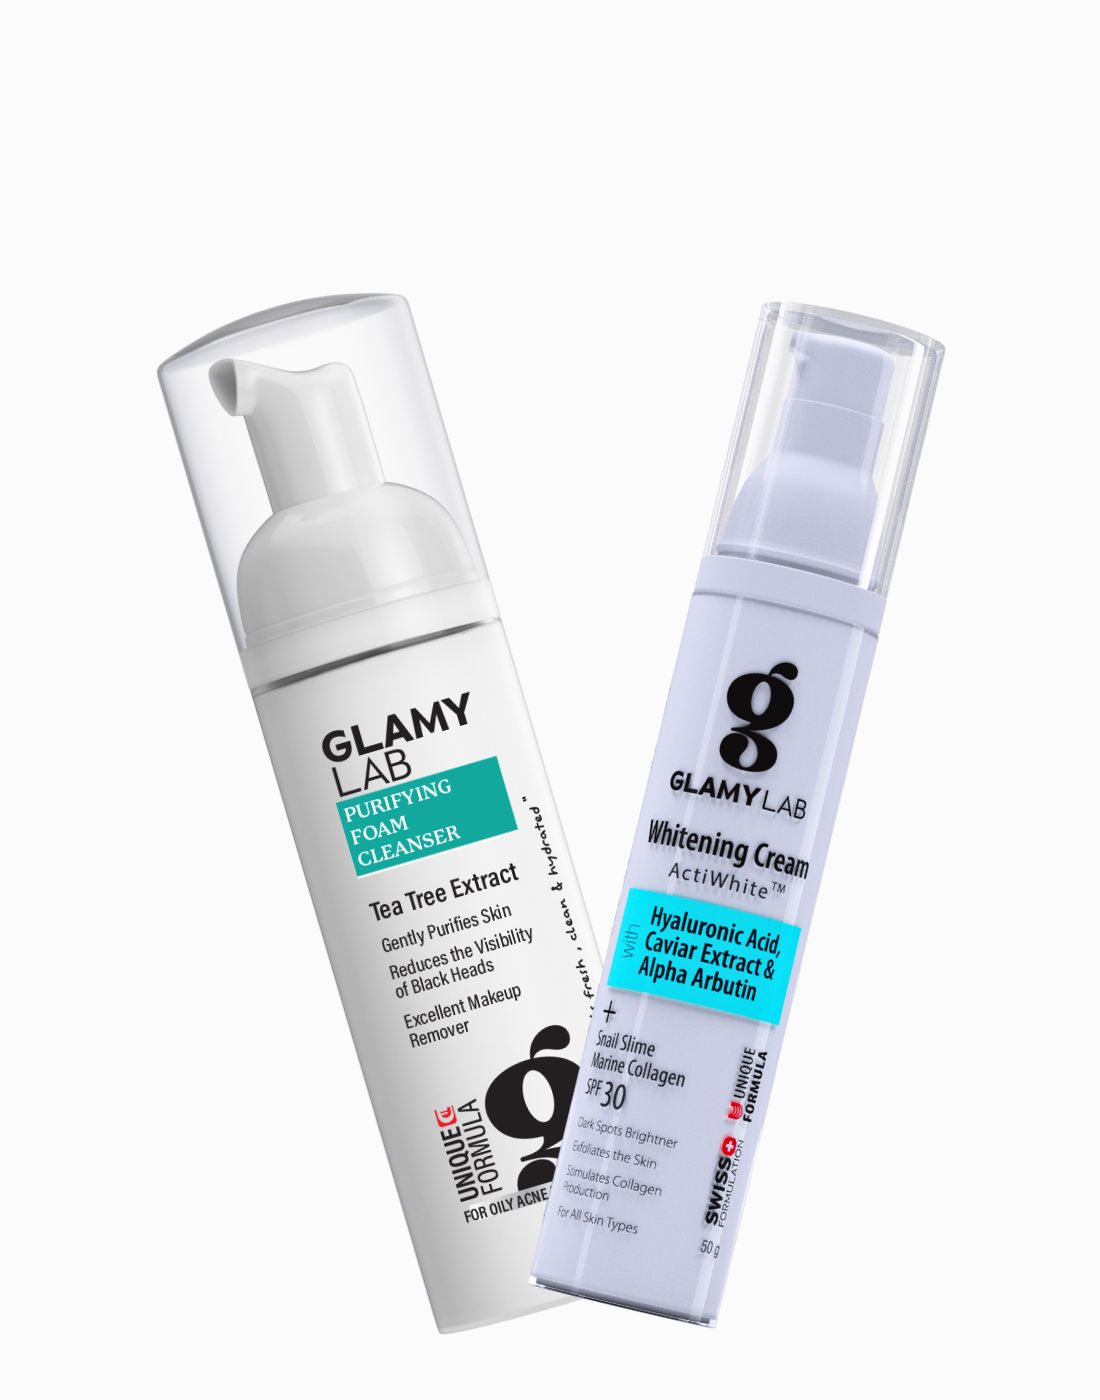 Glamy Lab Whitening SPF cream and Cleansing Foam Offer